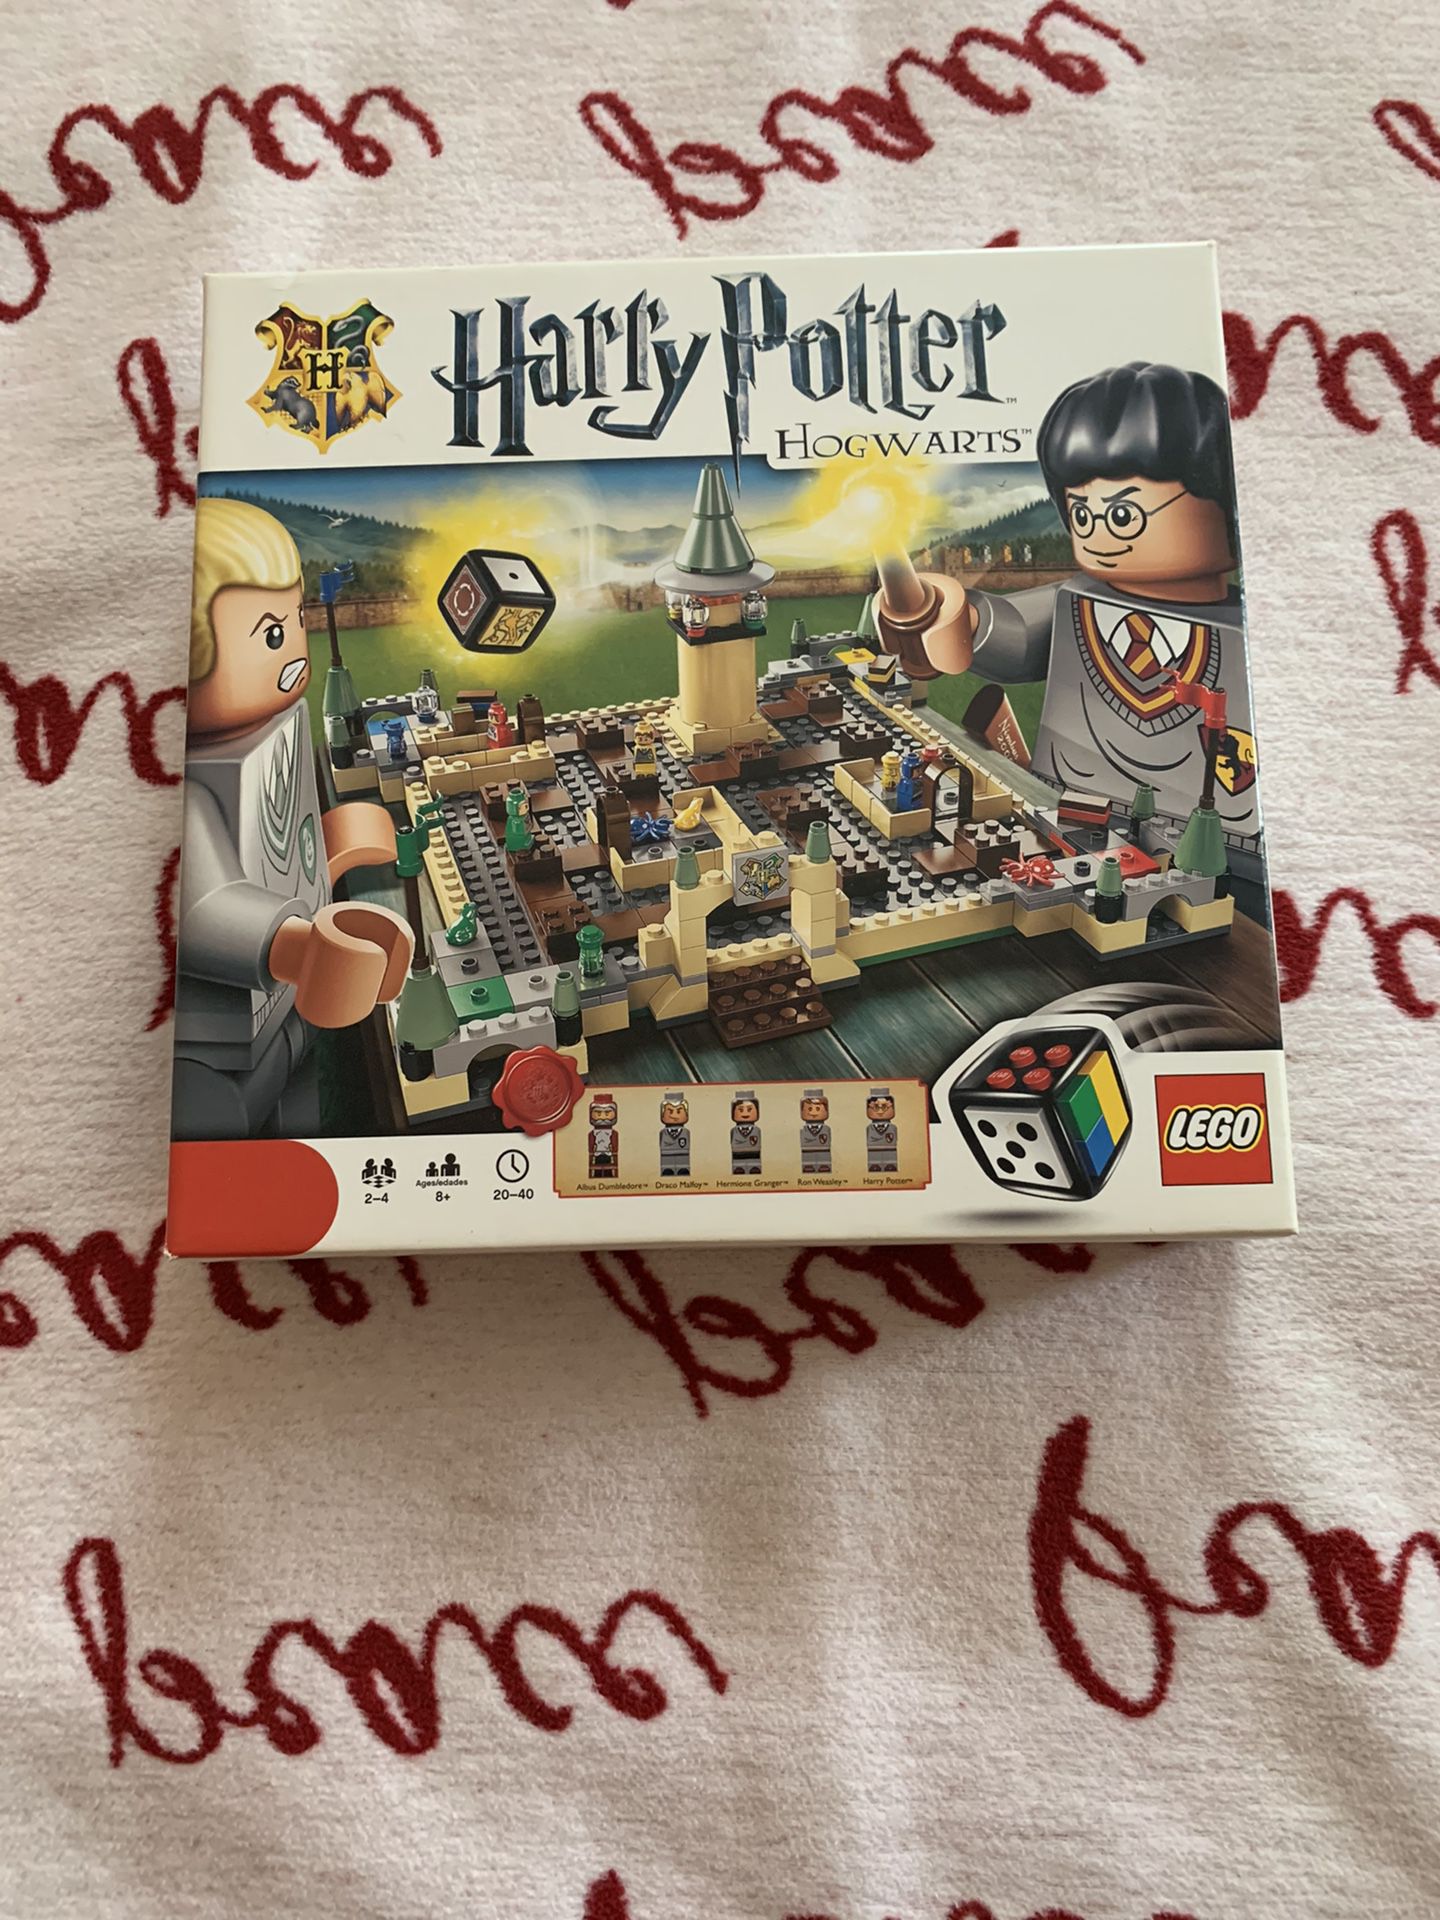 Lego Harry Potter board game